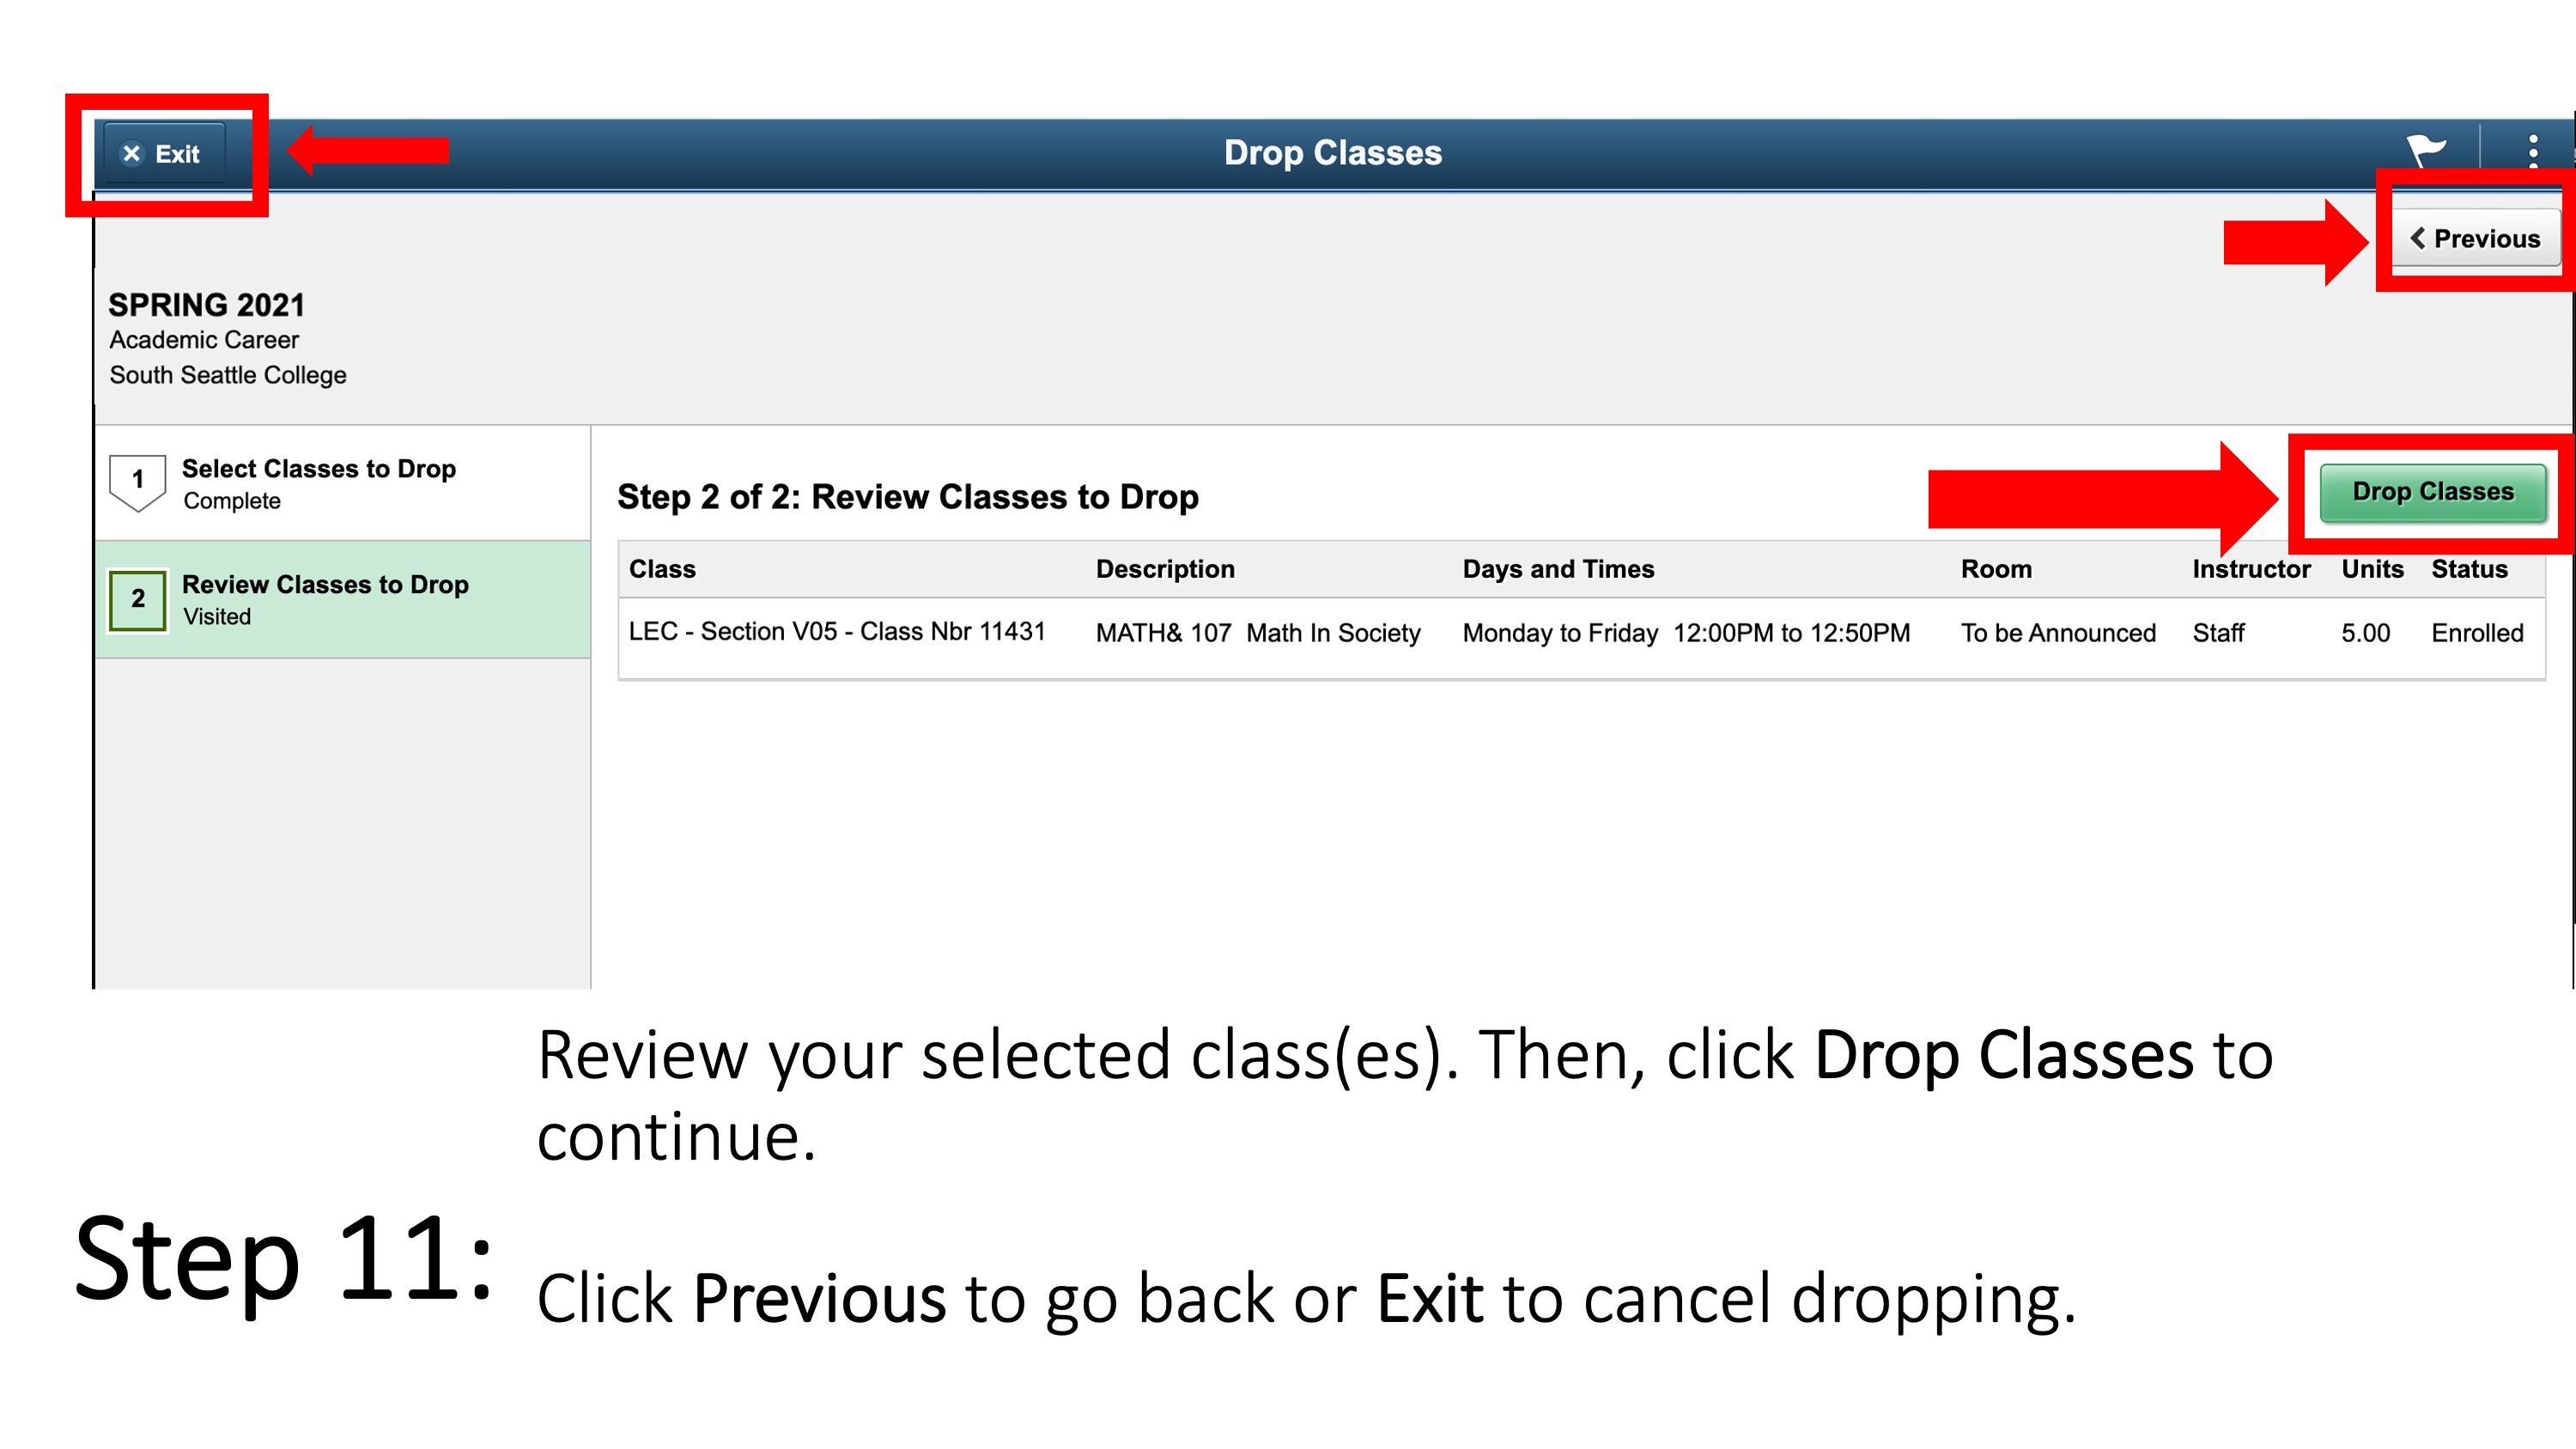 Review your selected class(es). Then, click Drop Classes to continue. Click Previous to go back or Exit to cancel dropping.